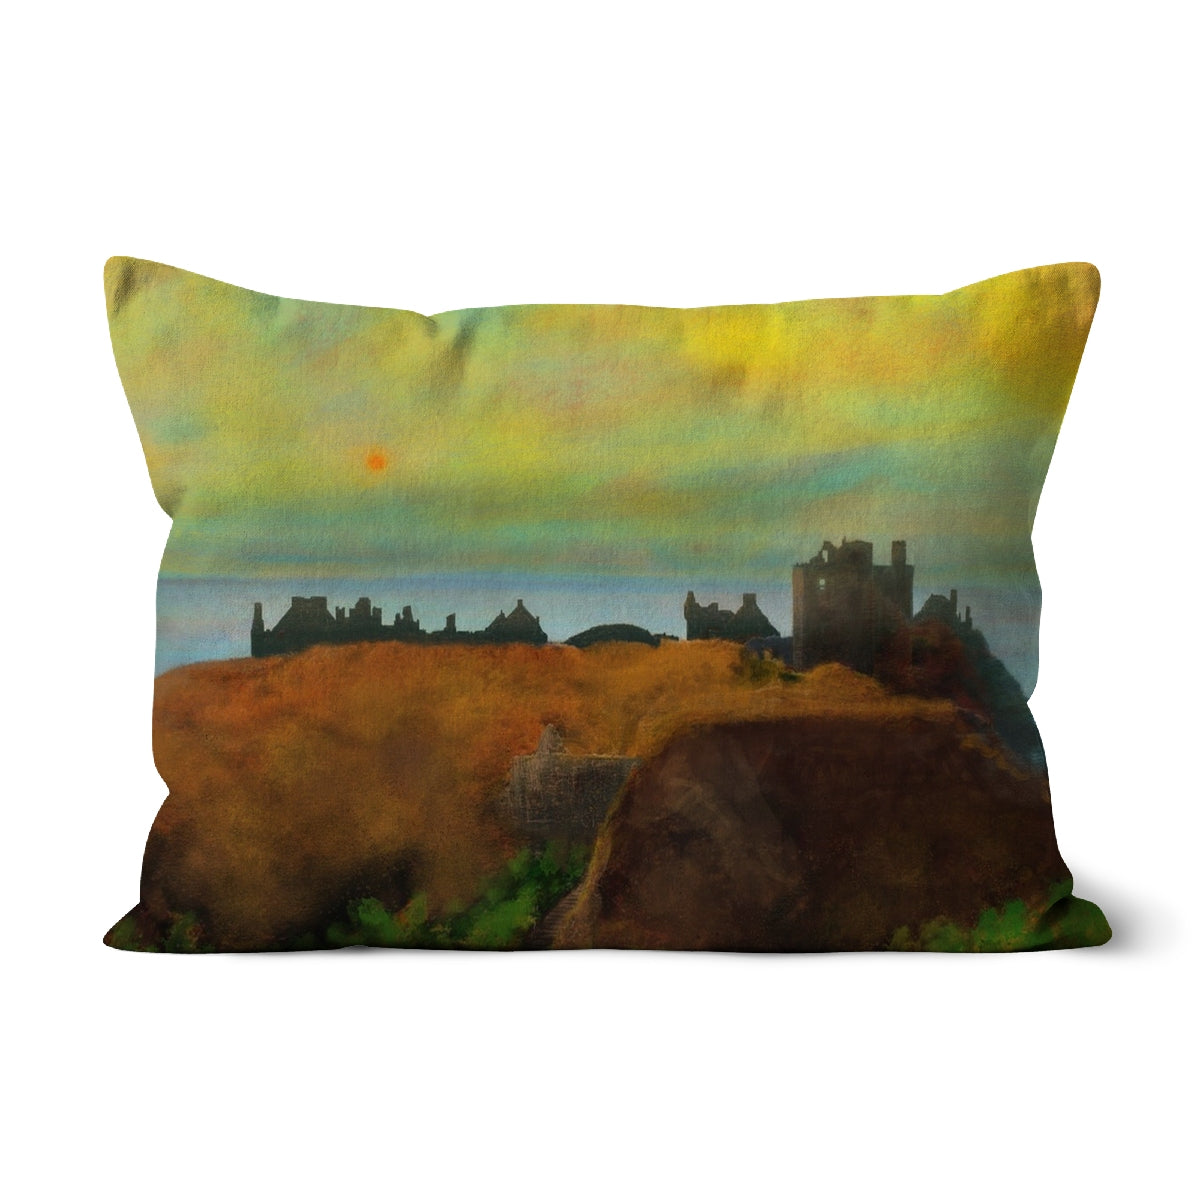 Dunnottar Castle Art Gifts Cushion-Cushions-Historic & Iconic Scotland Art Gallery-Faux Suede-19"x13"-Paintings, Prints, Homeware, Art Gifts From Scotland By Scottish Artist Kevin Hunter